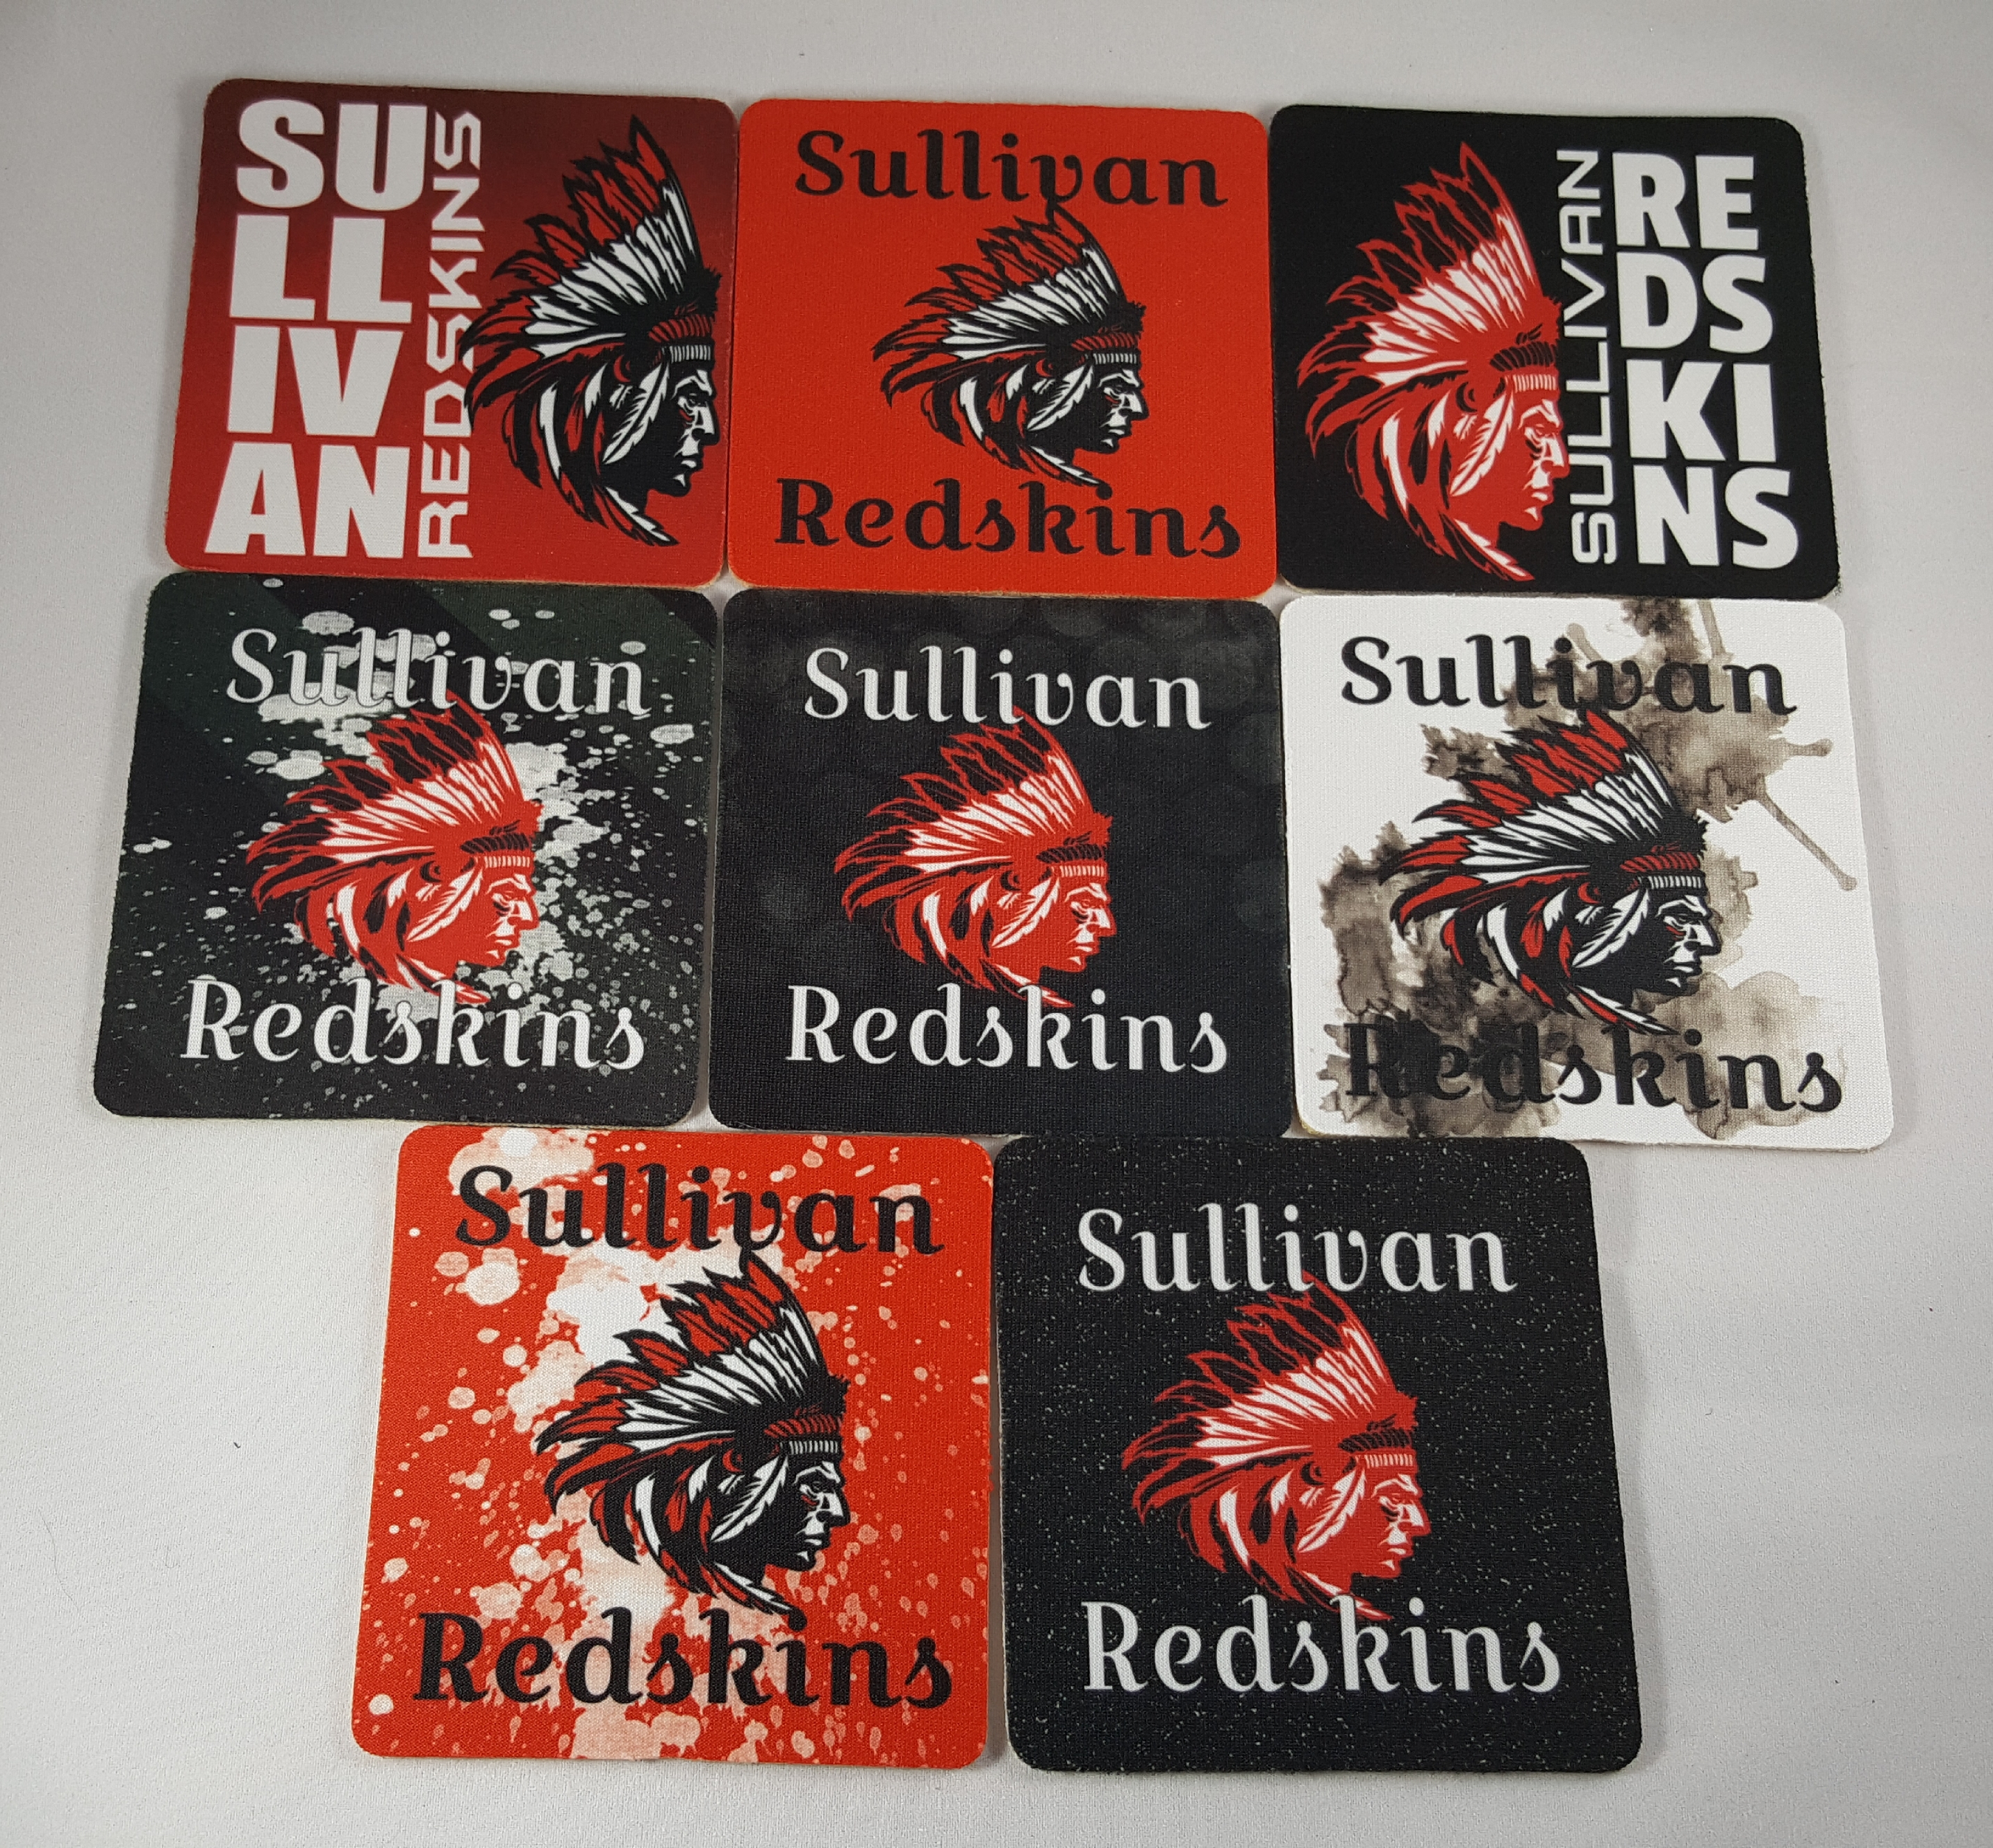 School Spirit Coasters made with sublimation printing